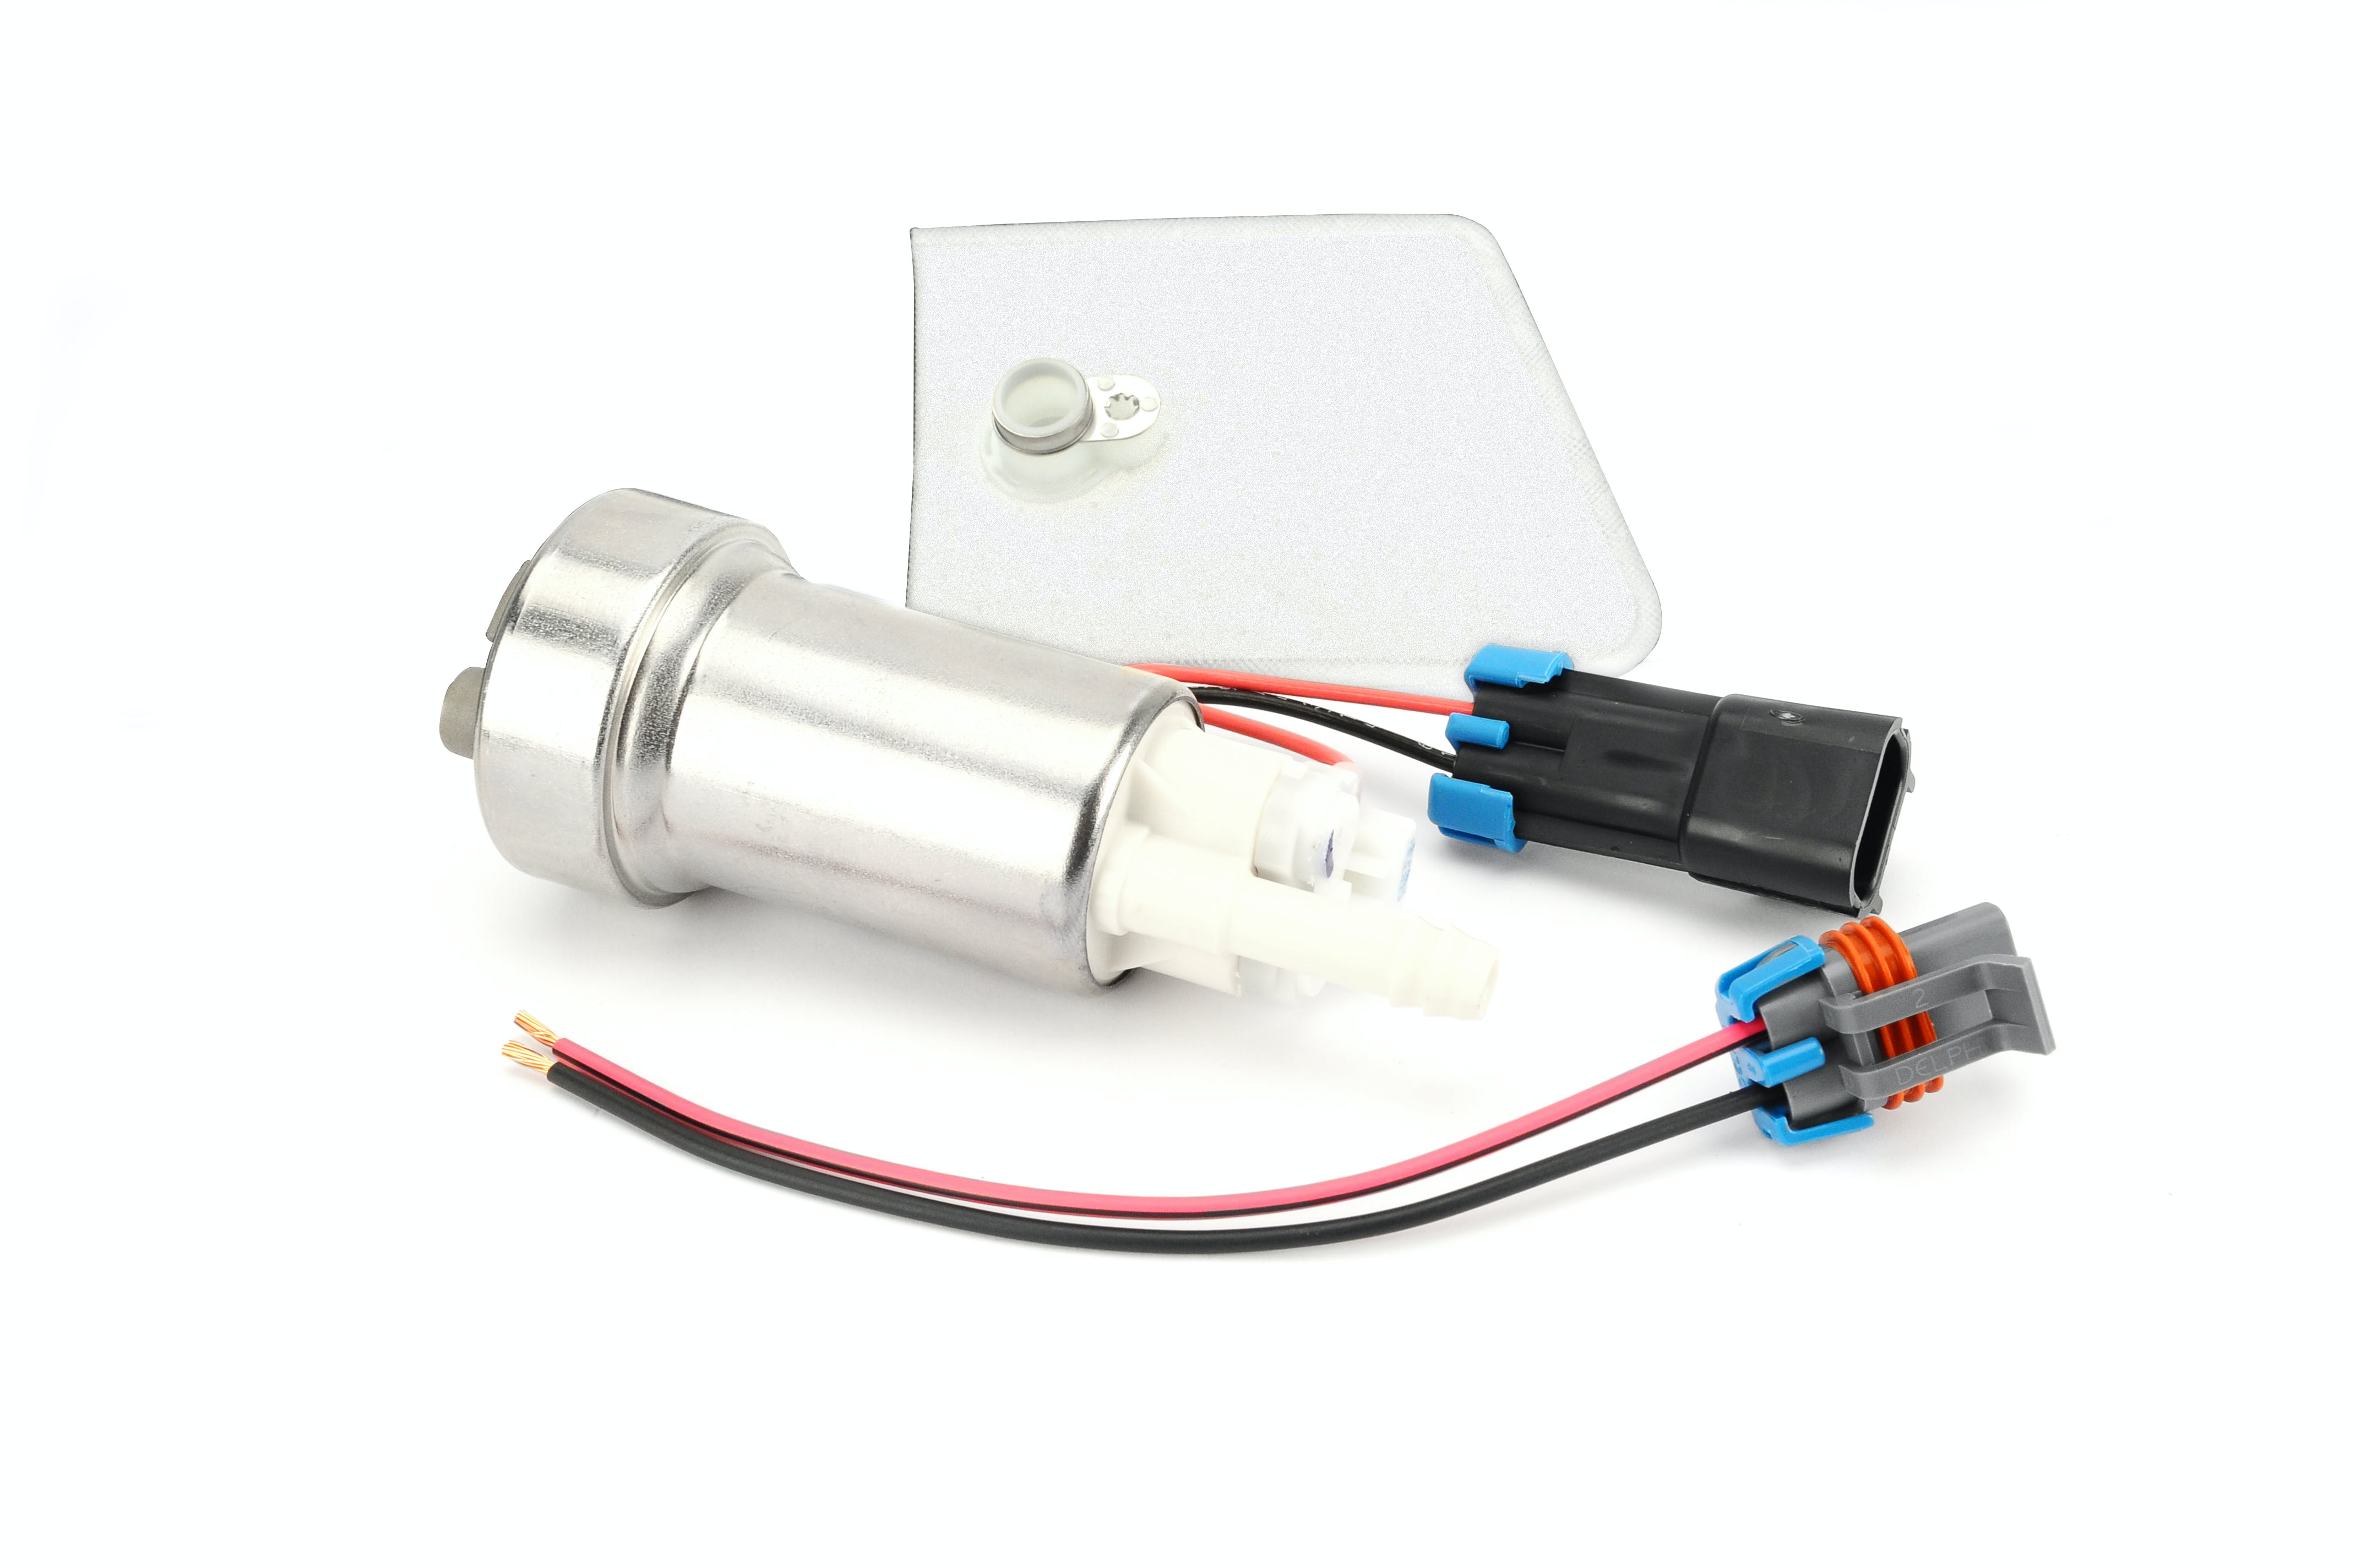 FAST - Fuel Air Spark Technology 30401-P In-Tank Fuel Pump